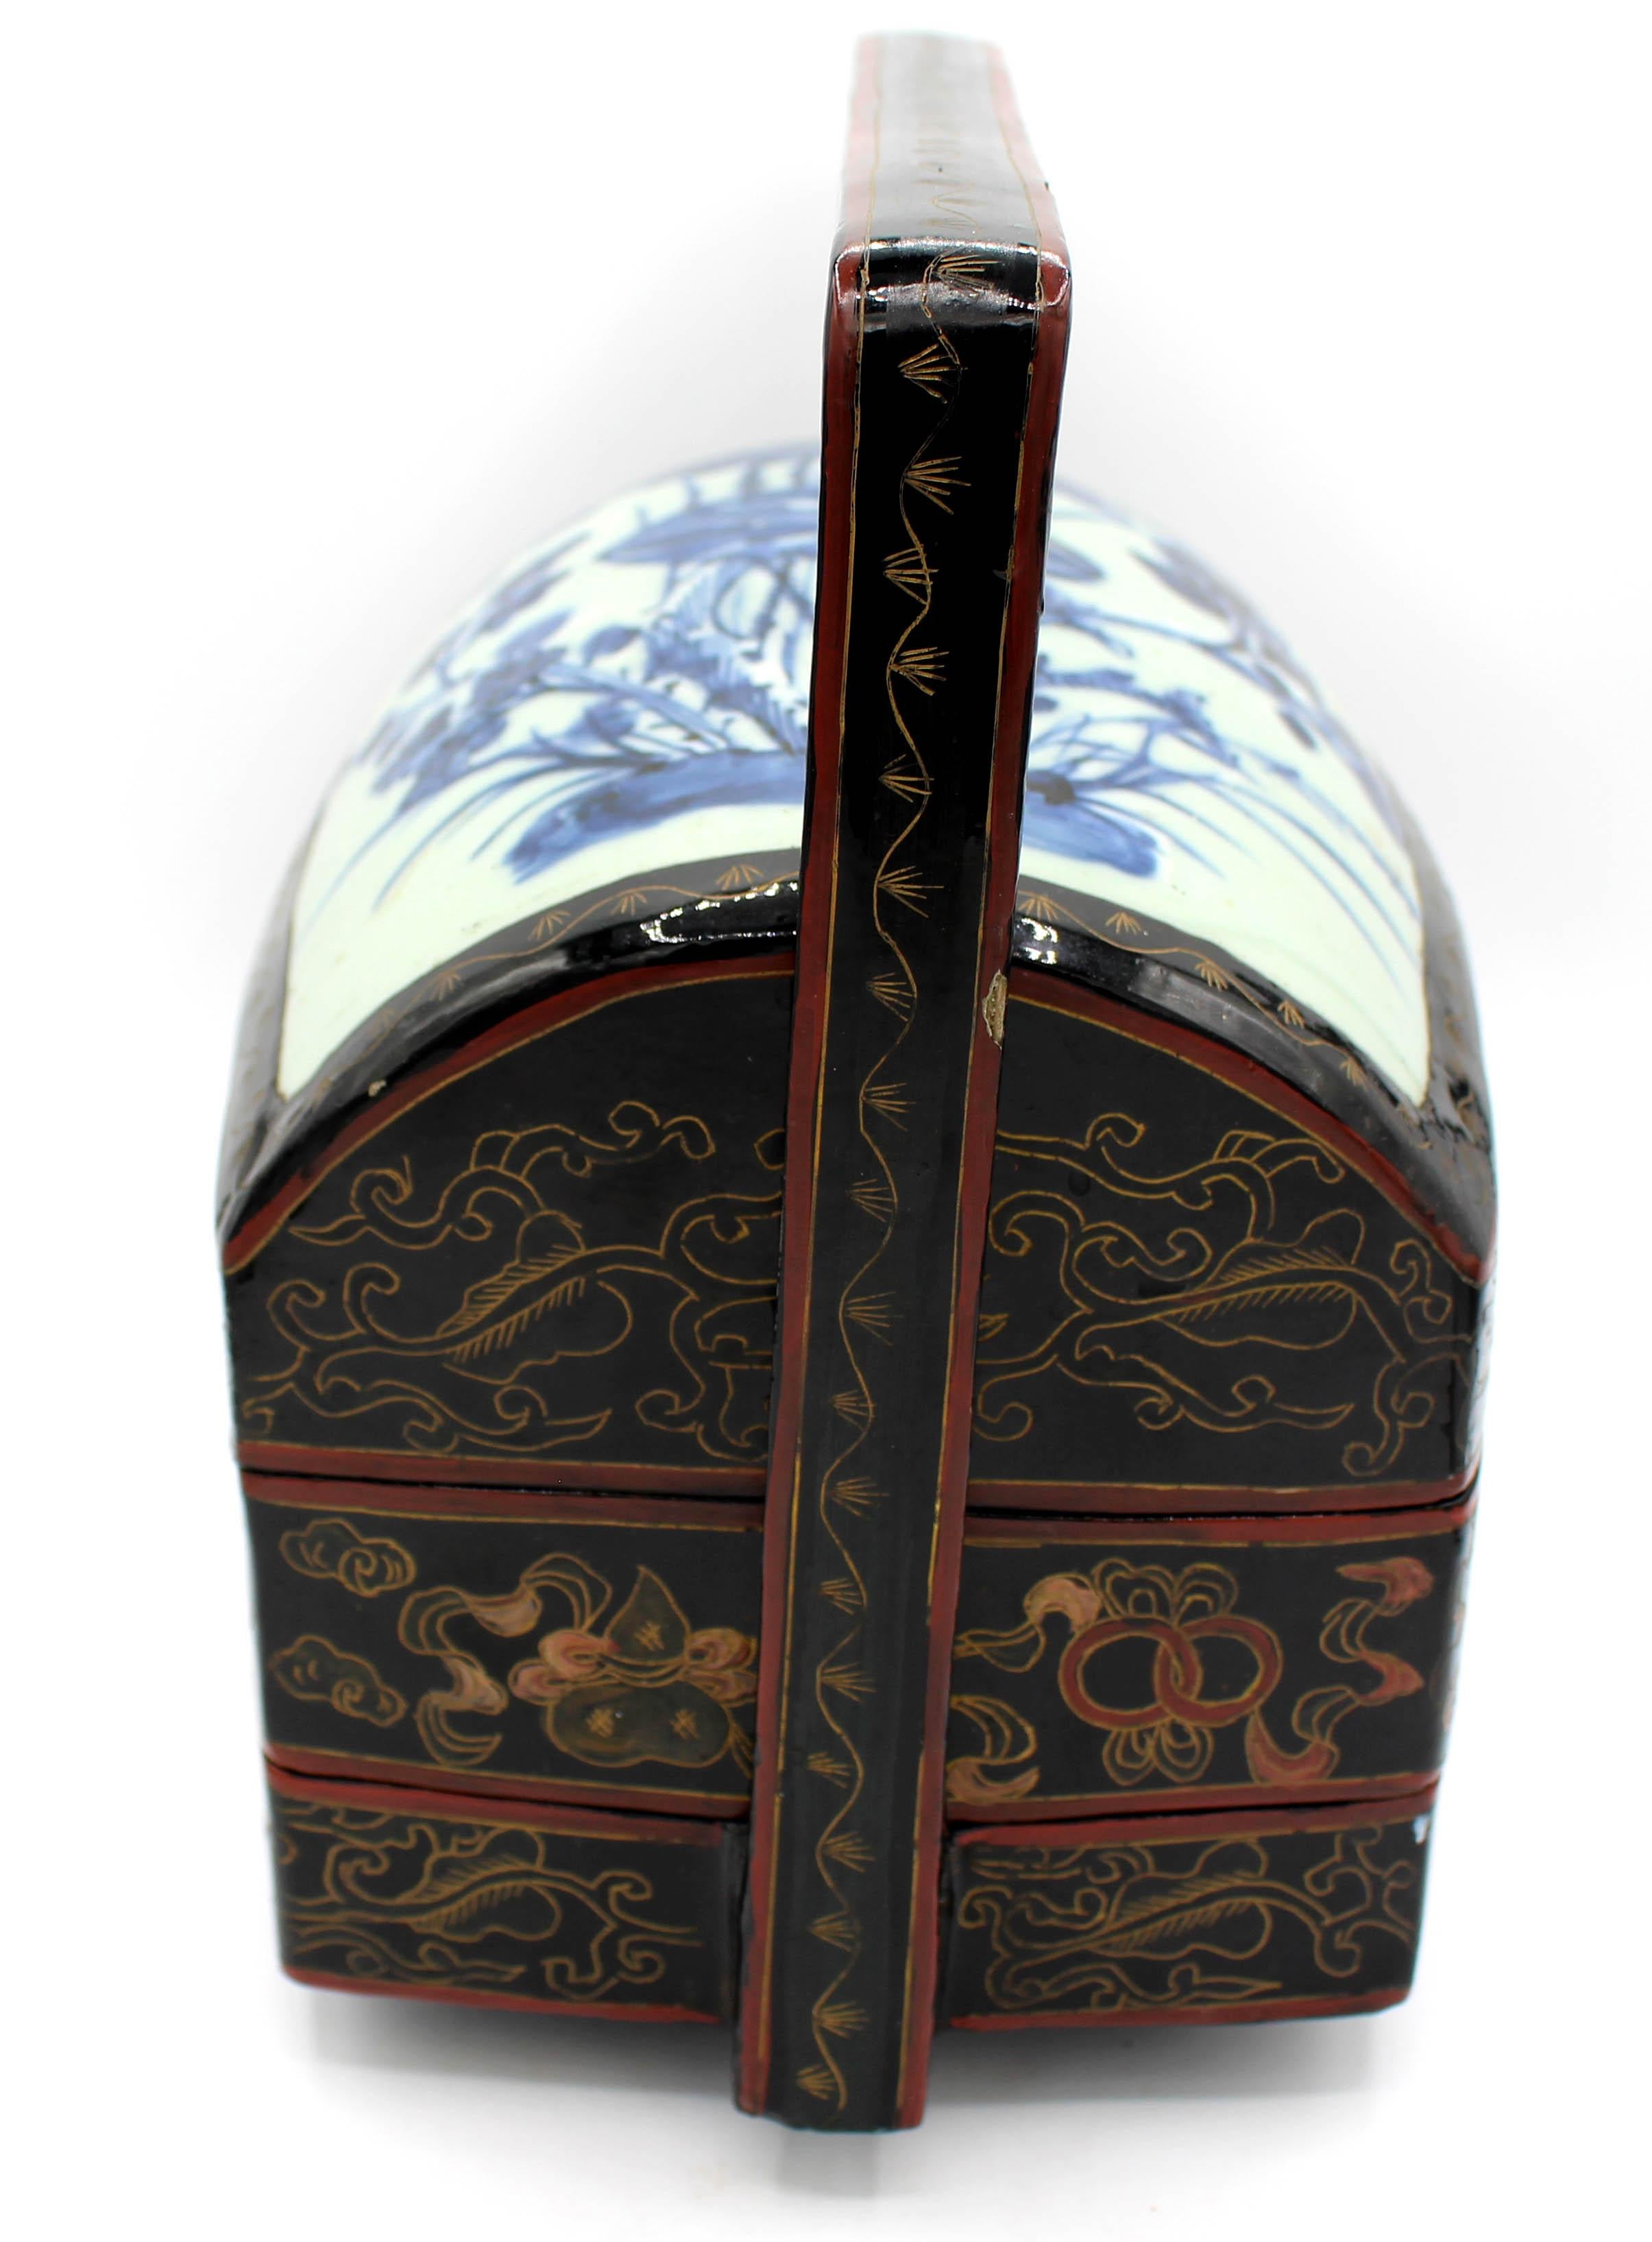 Mid-20th century wedding box, Chinese. Lacquer with vase shard, the shard of the late Qing period. Minor nicks commensurate with age & use. 10 3/4